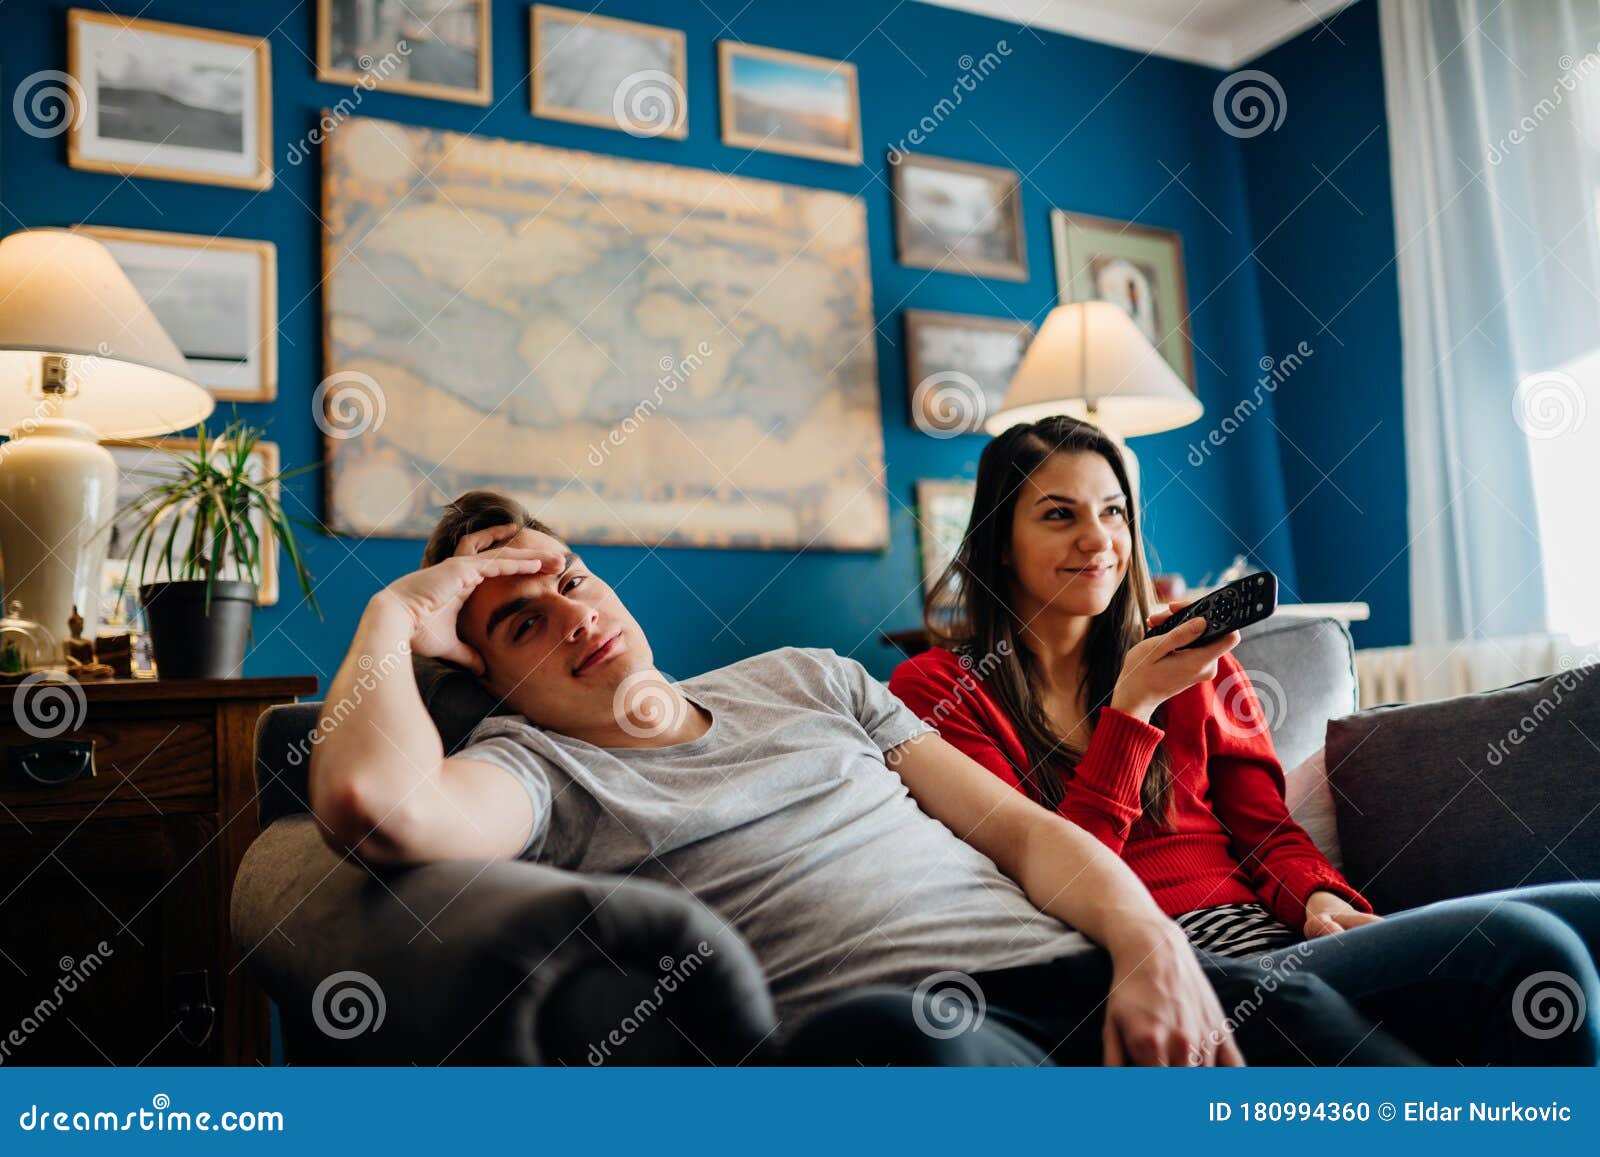 couple at home watching tv.remote control fight won by girlfriend.boyfriend bored by tv program.watching her favorite show/film.